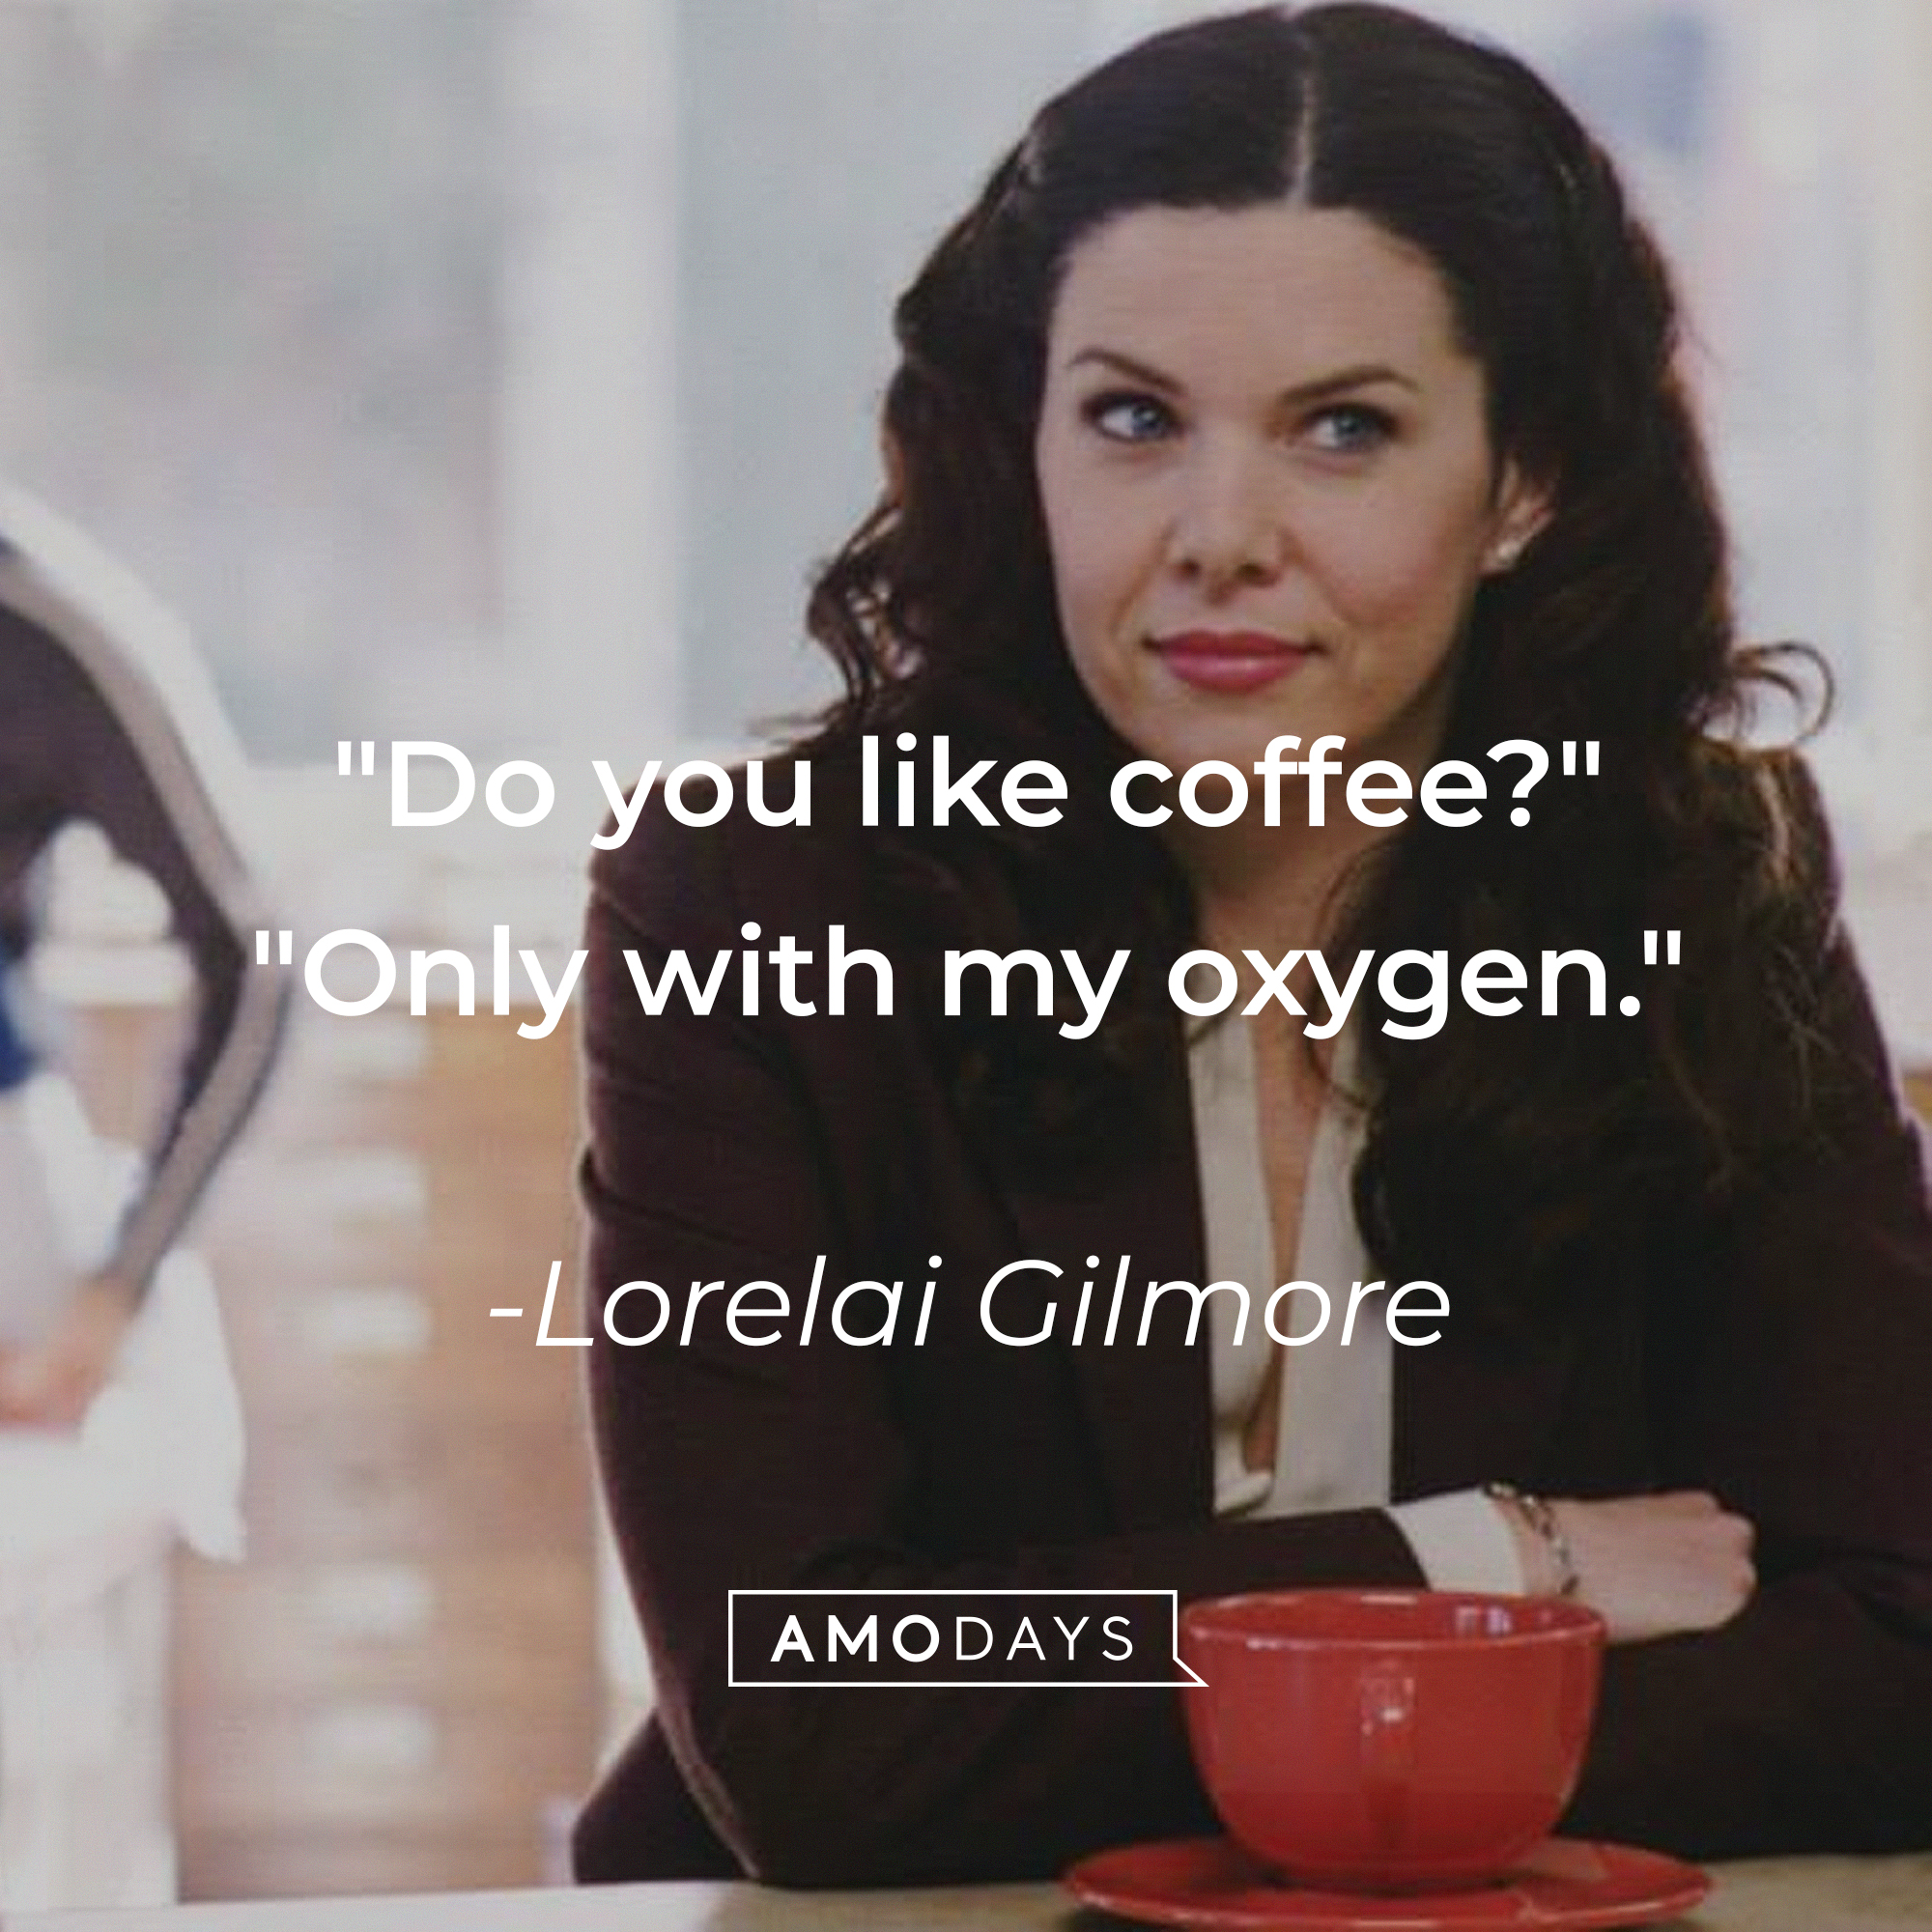 Lorelai Gilmore's quote: "Do you like coffee?" "Only with my oxygen." | Source: Facebook/GilmoreGirls